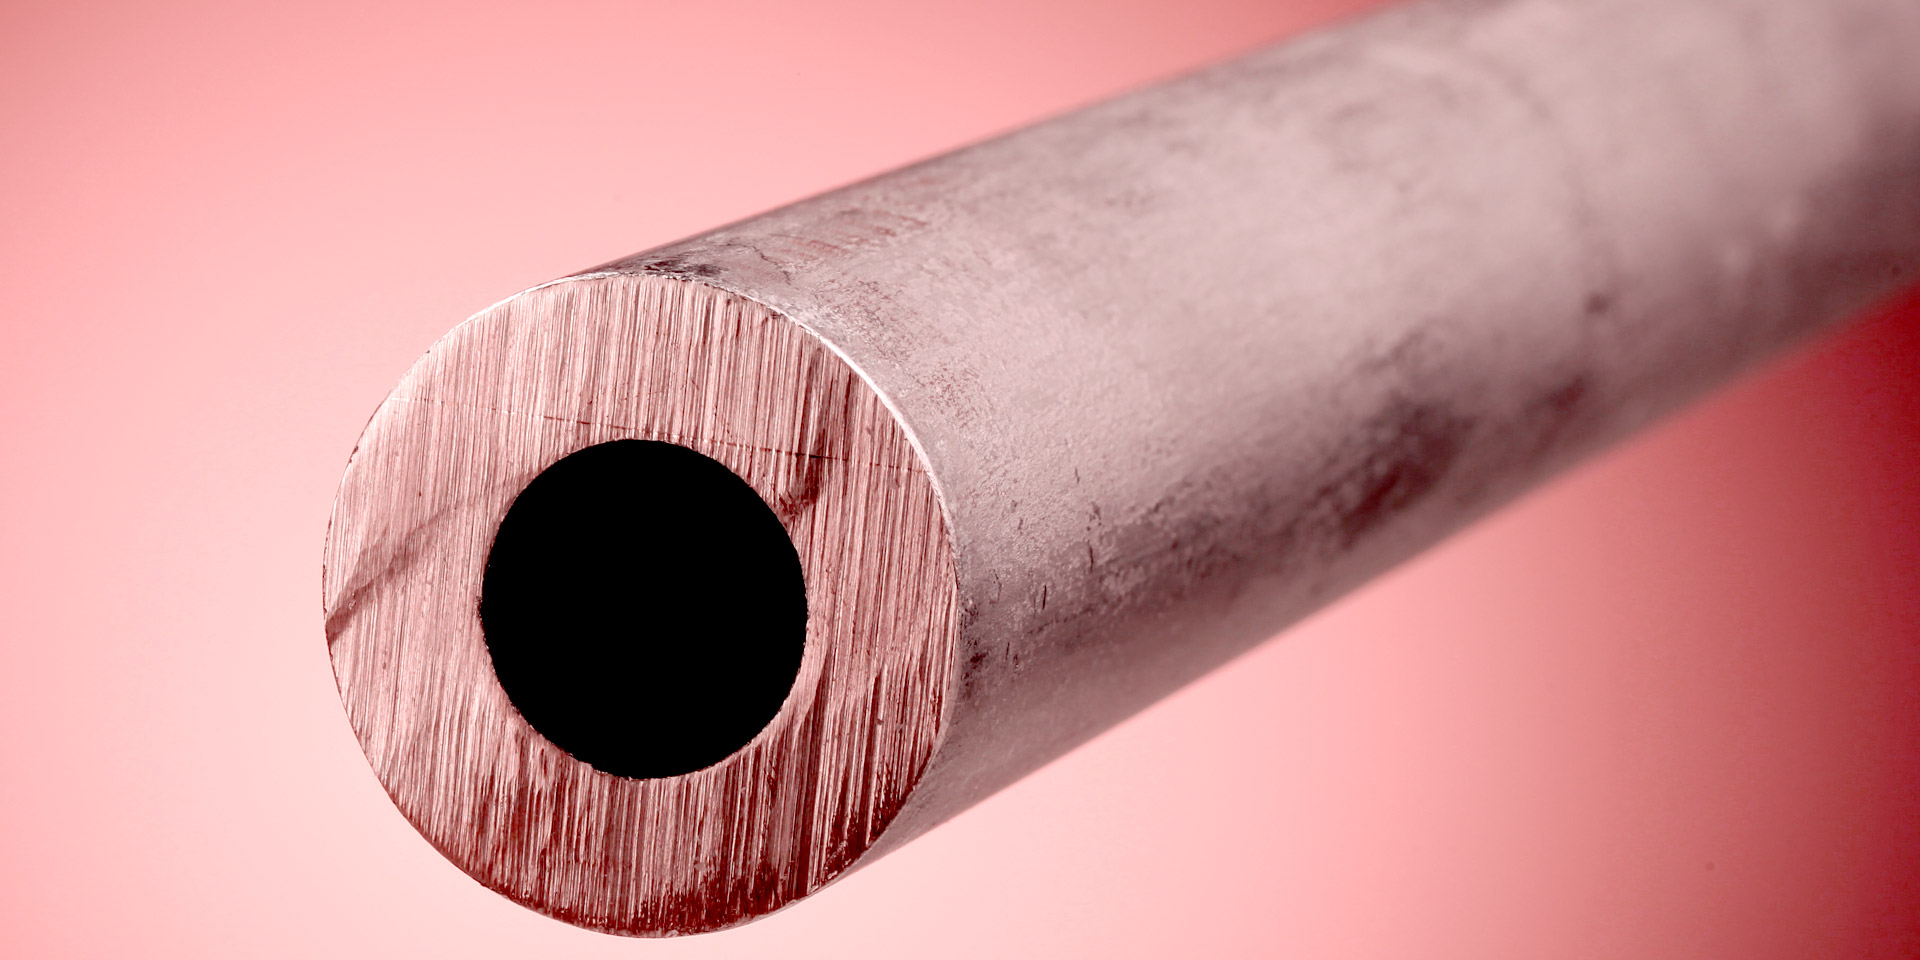 Cut section of a steel pipe